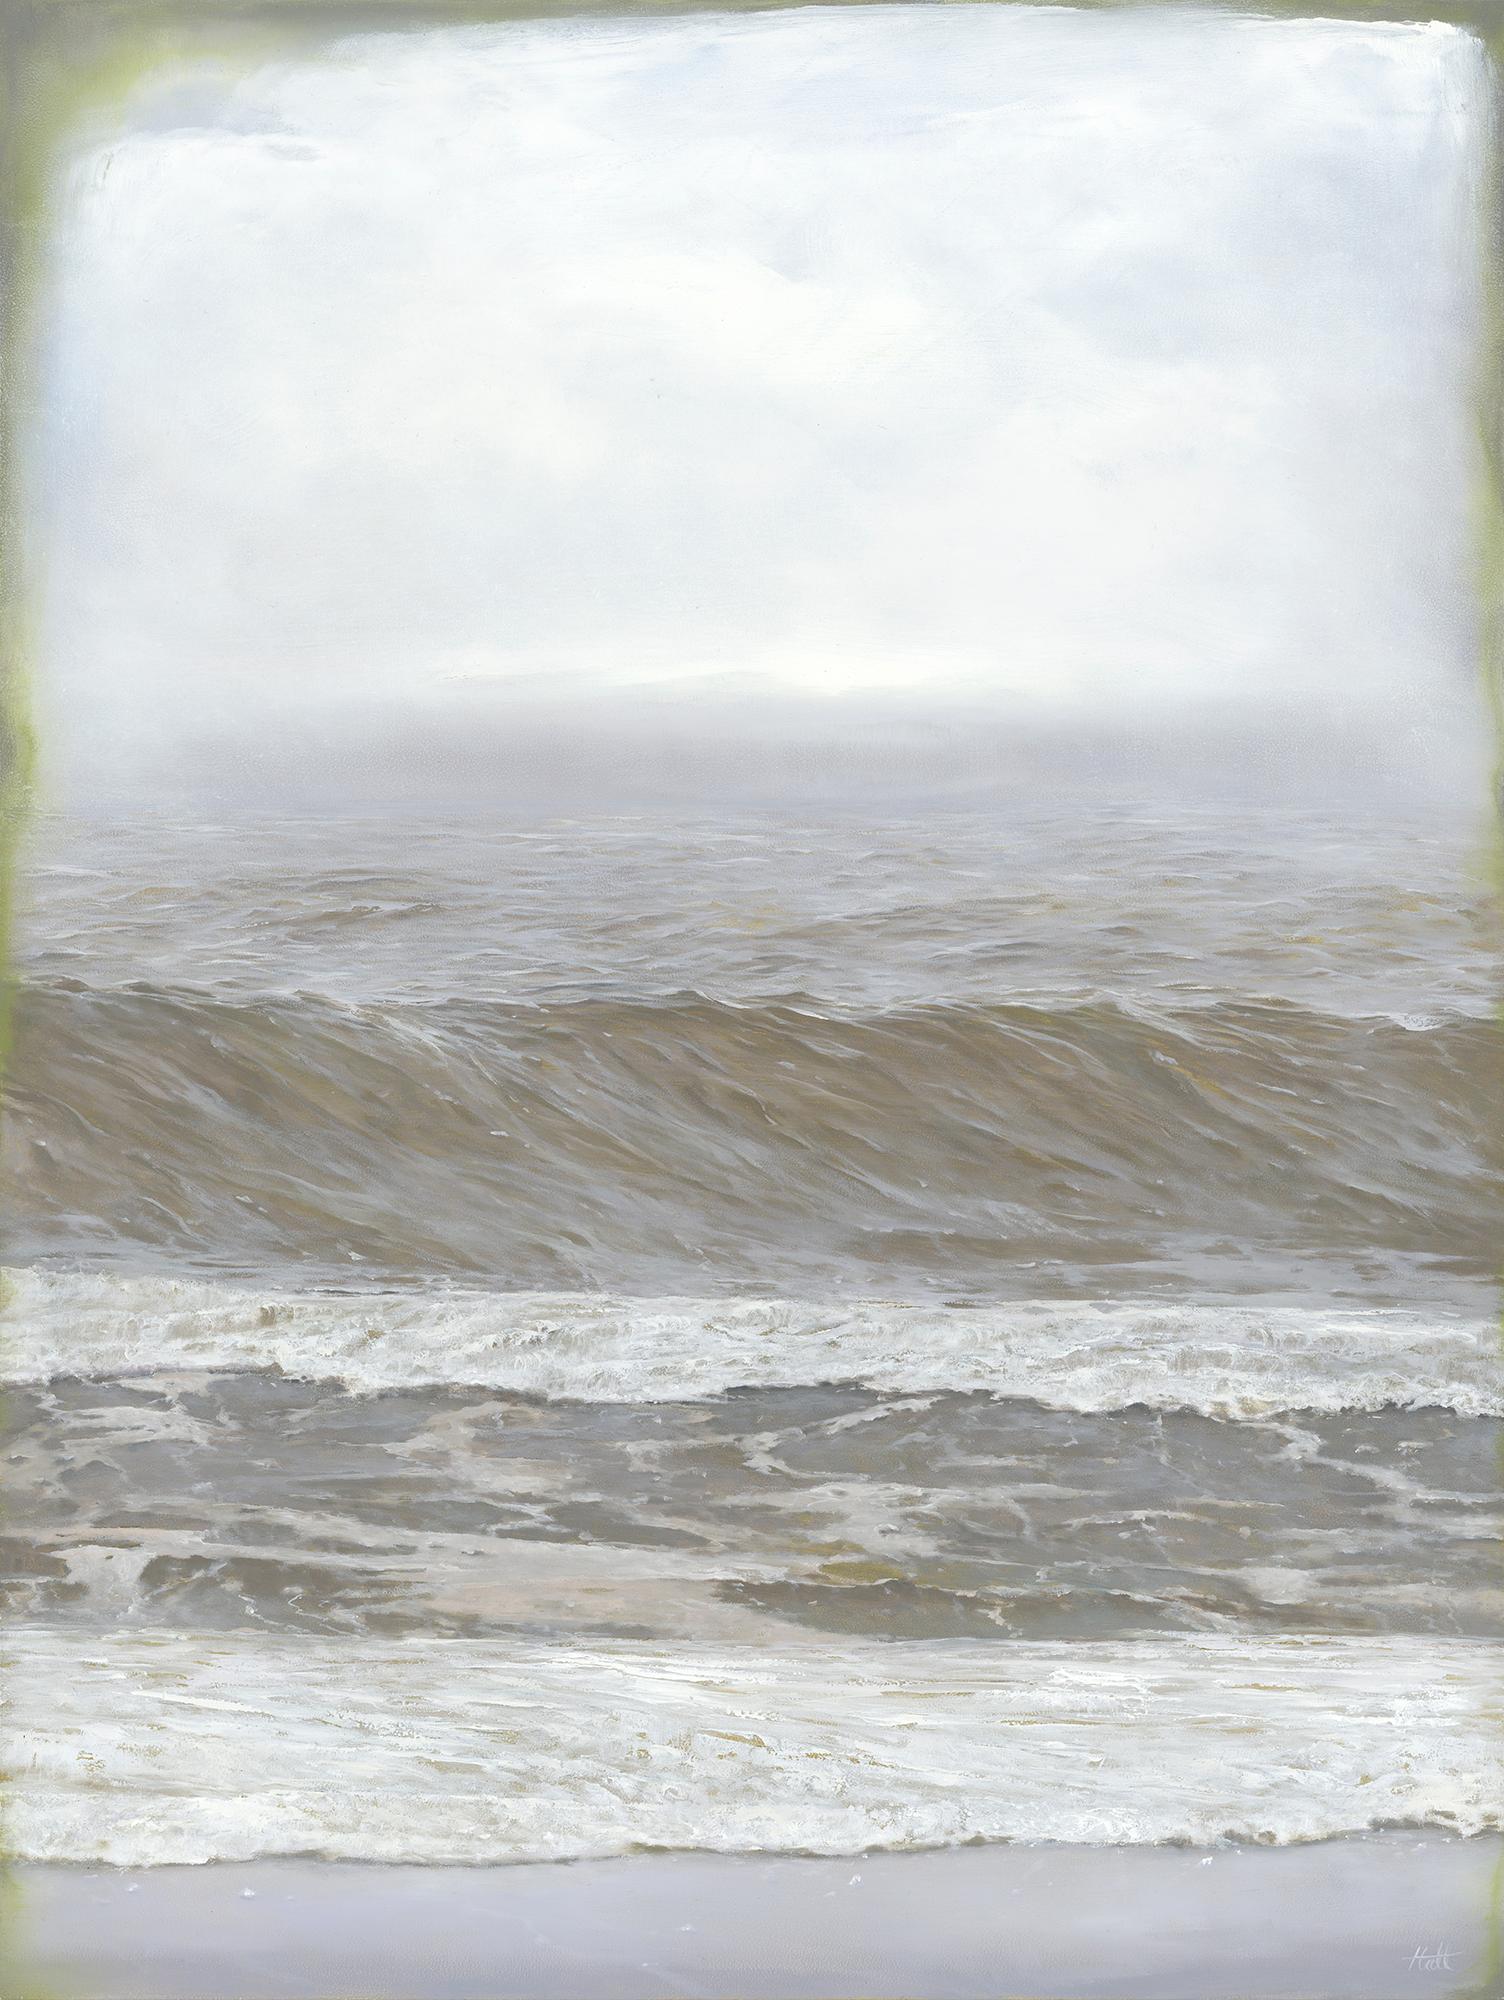 "Swell Season" (2023) by Adam Hall is an evocative original oil painting on panel, measuring 24 x 18 inches and elegantly framed to 25 x 19 inches. This piece captures the gentle yet powerful swell of ocean waves, rendered in a muted palette that